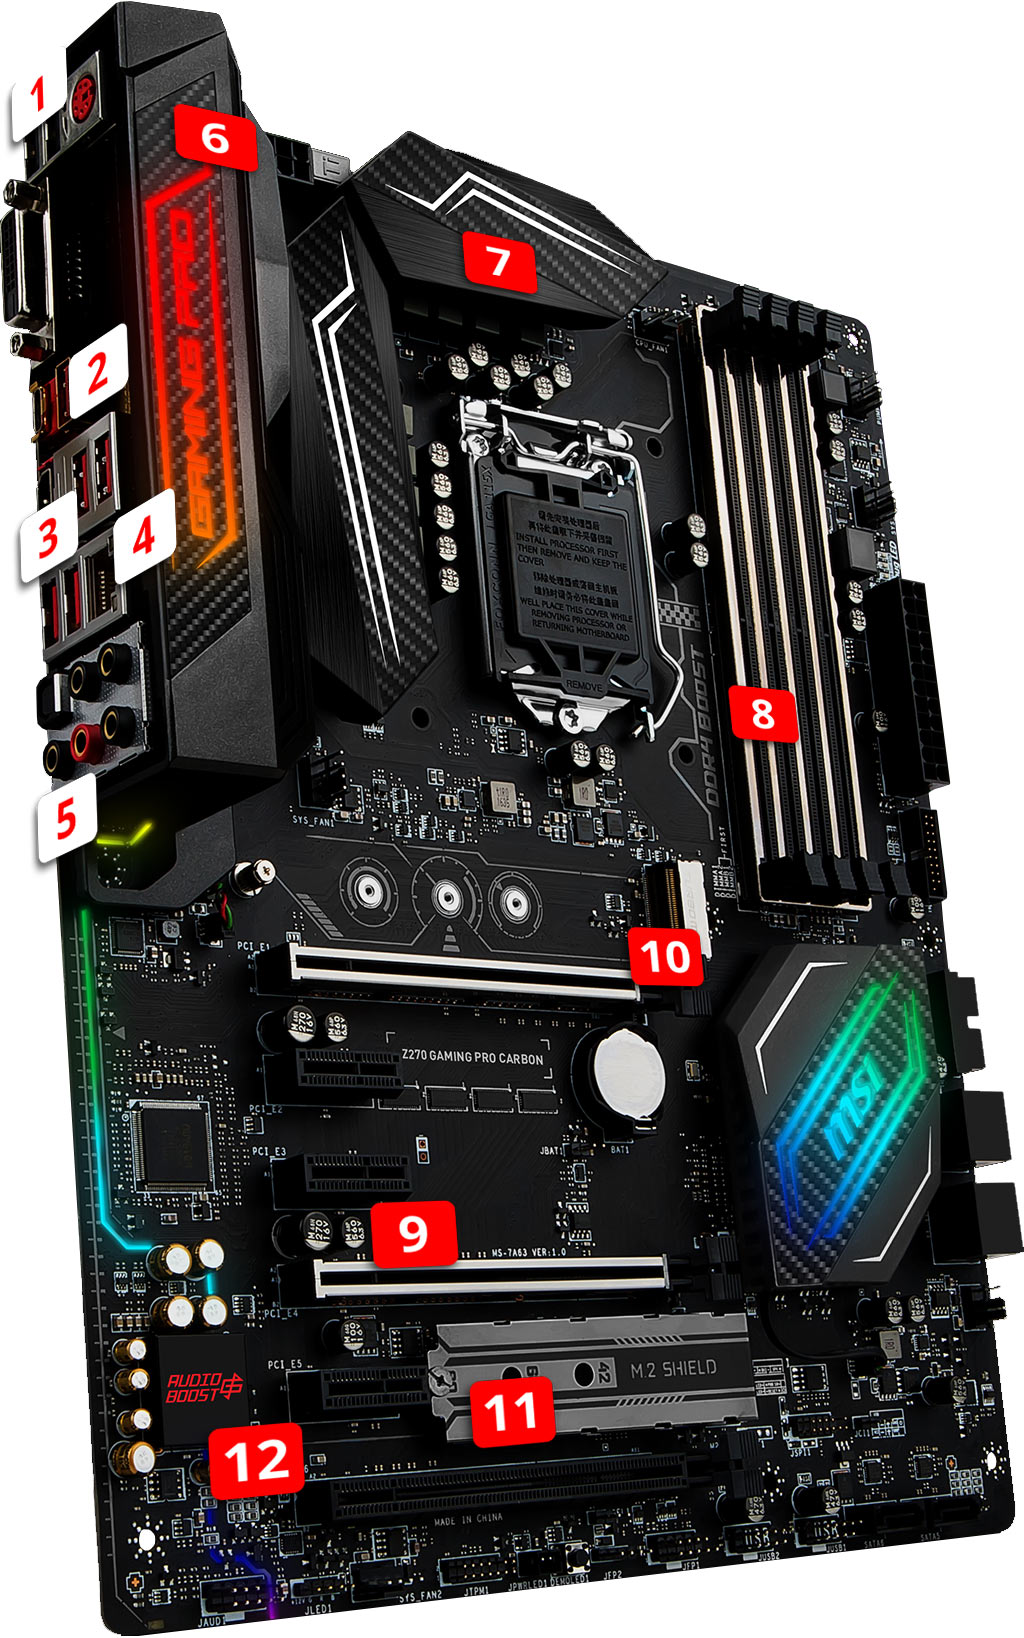 MSI Z270 GAMING Pro Carbon overview